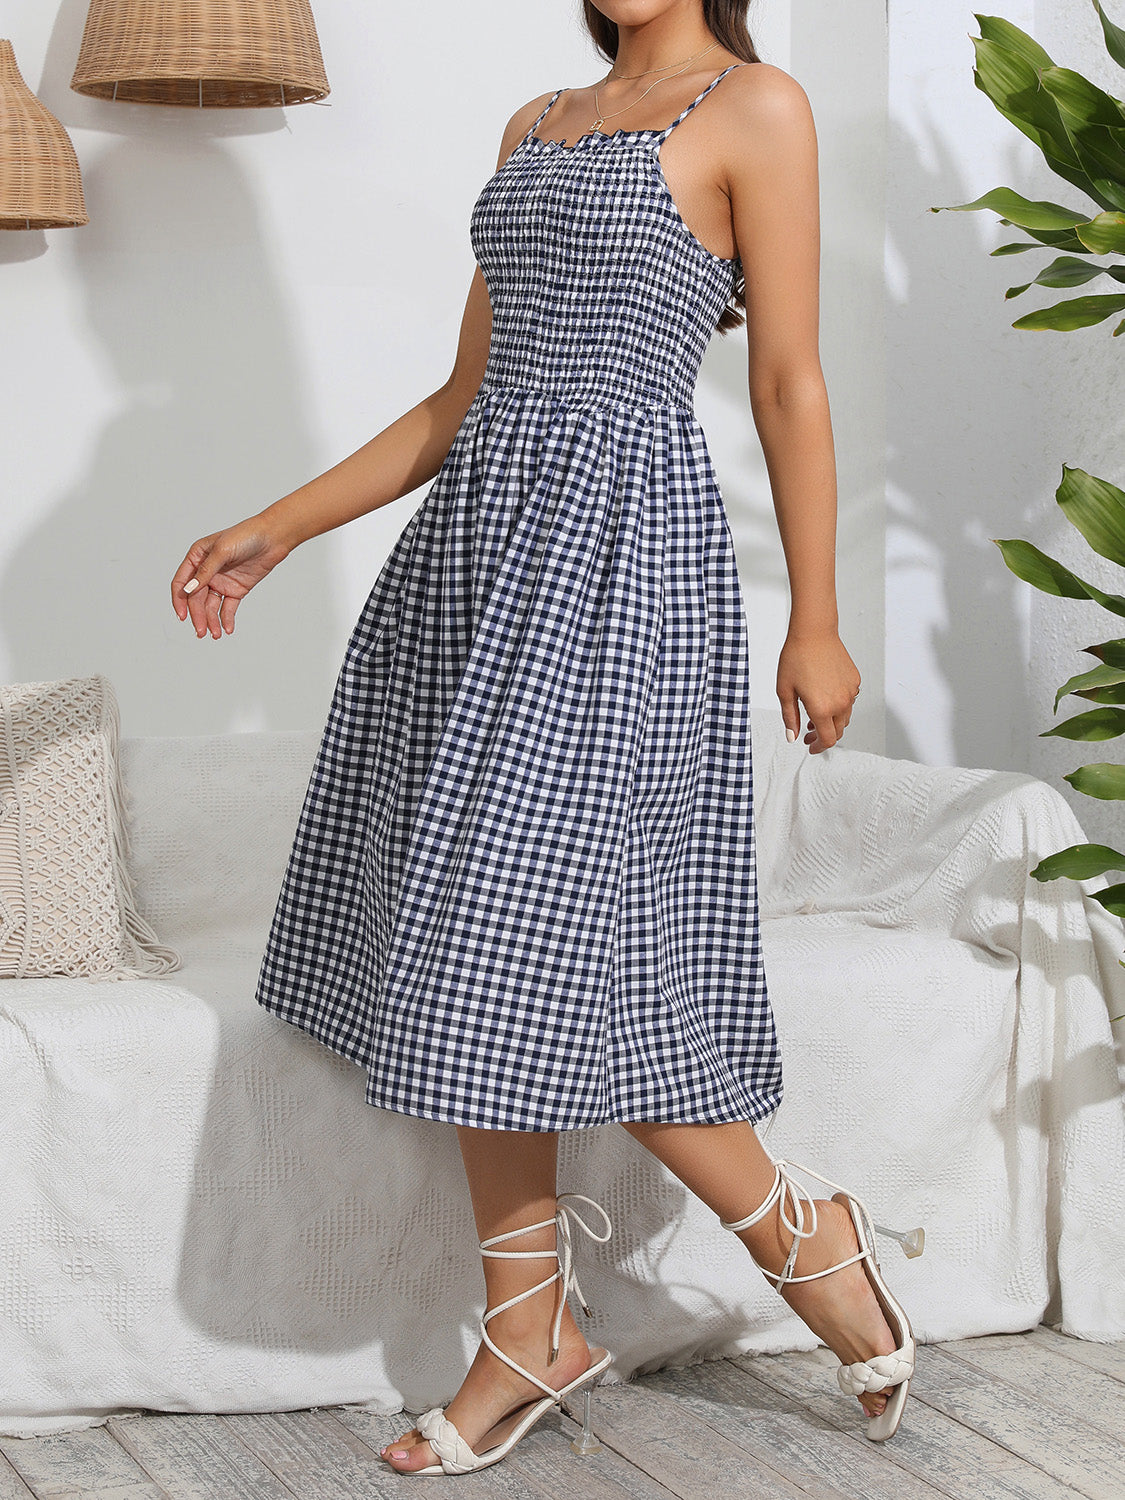 Classic blue gingham midi dress with a smocked bodice